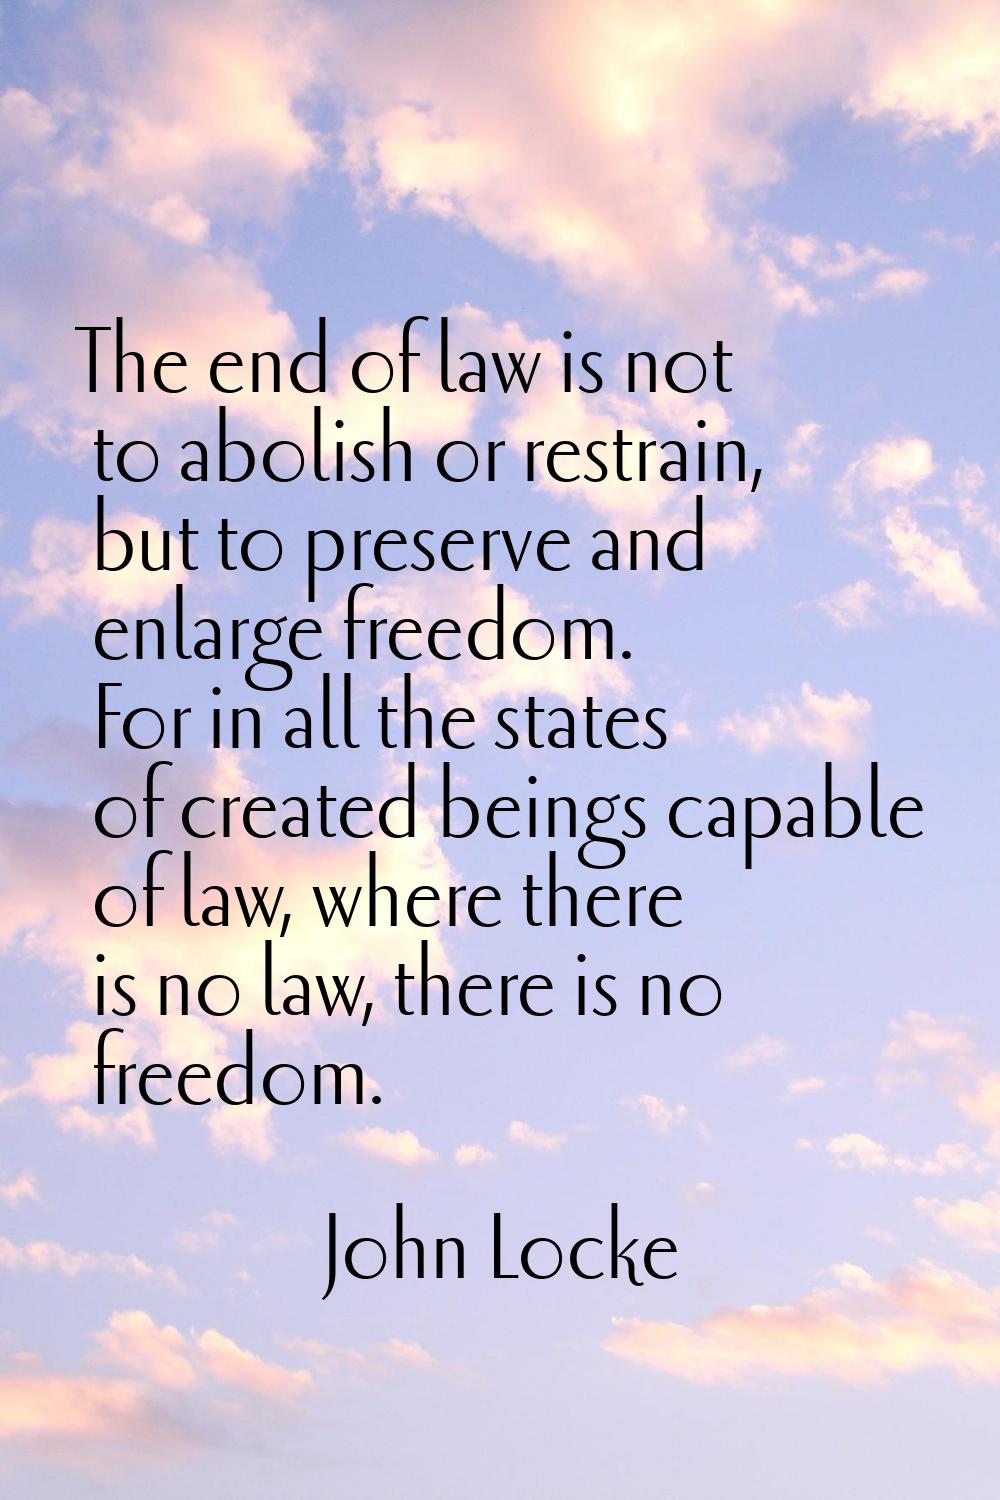 The end of law is not to abolish or restrain, but to preserve and enlarge freedom. For in all the s